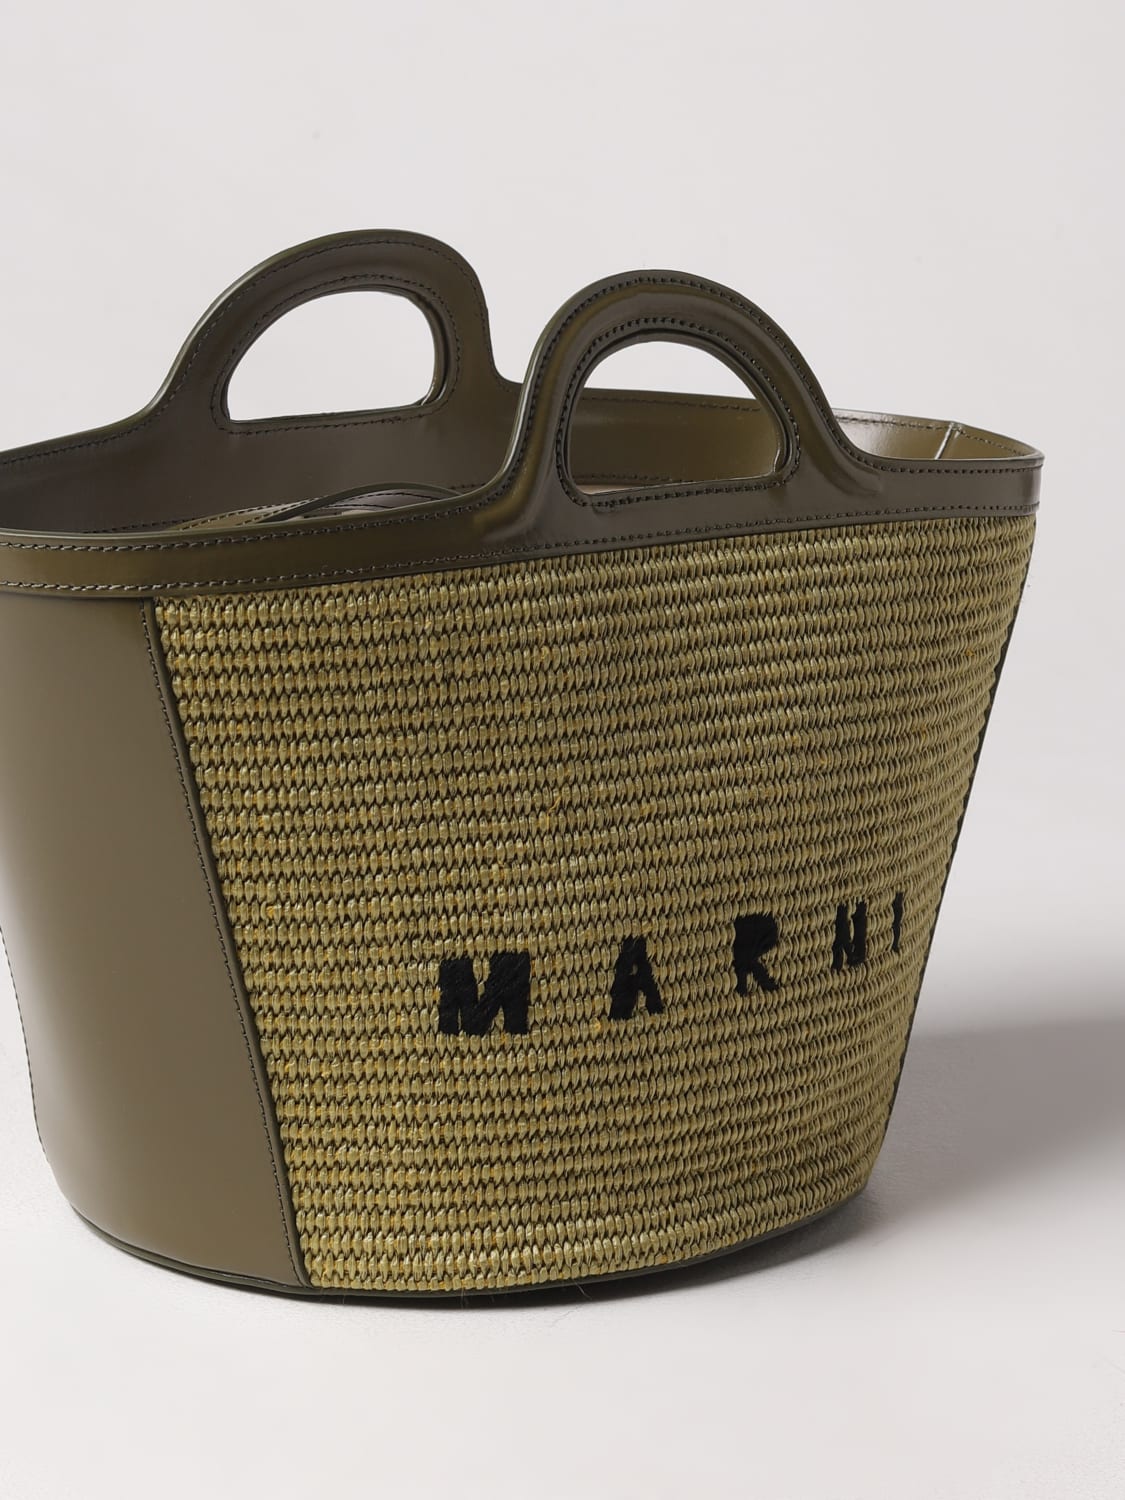 Marni Outlet: Tropicalia bag in leather and raffia - Green